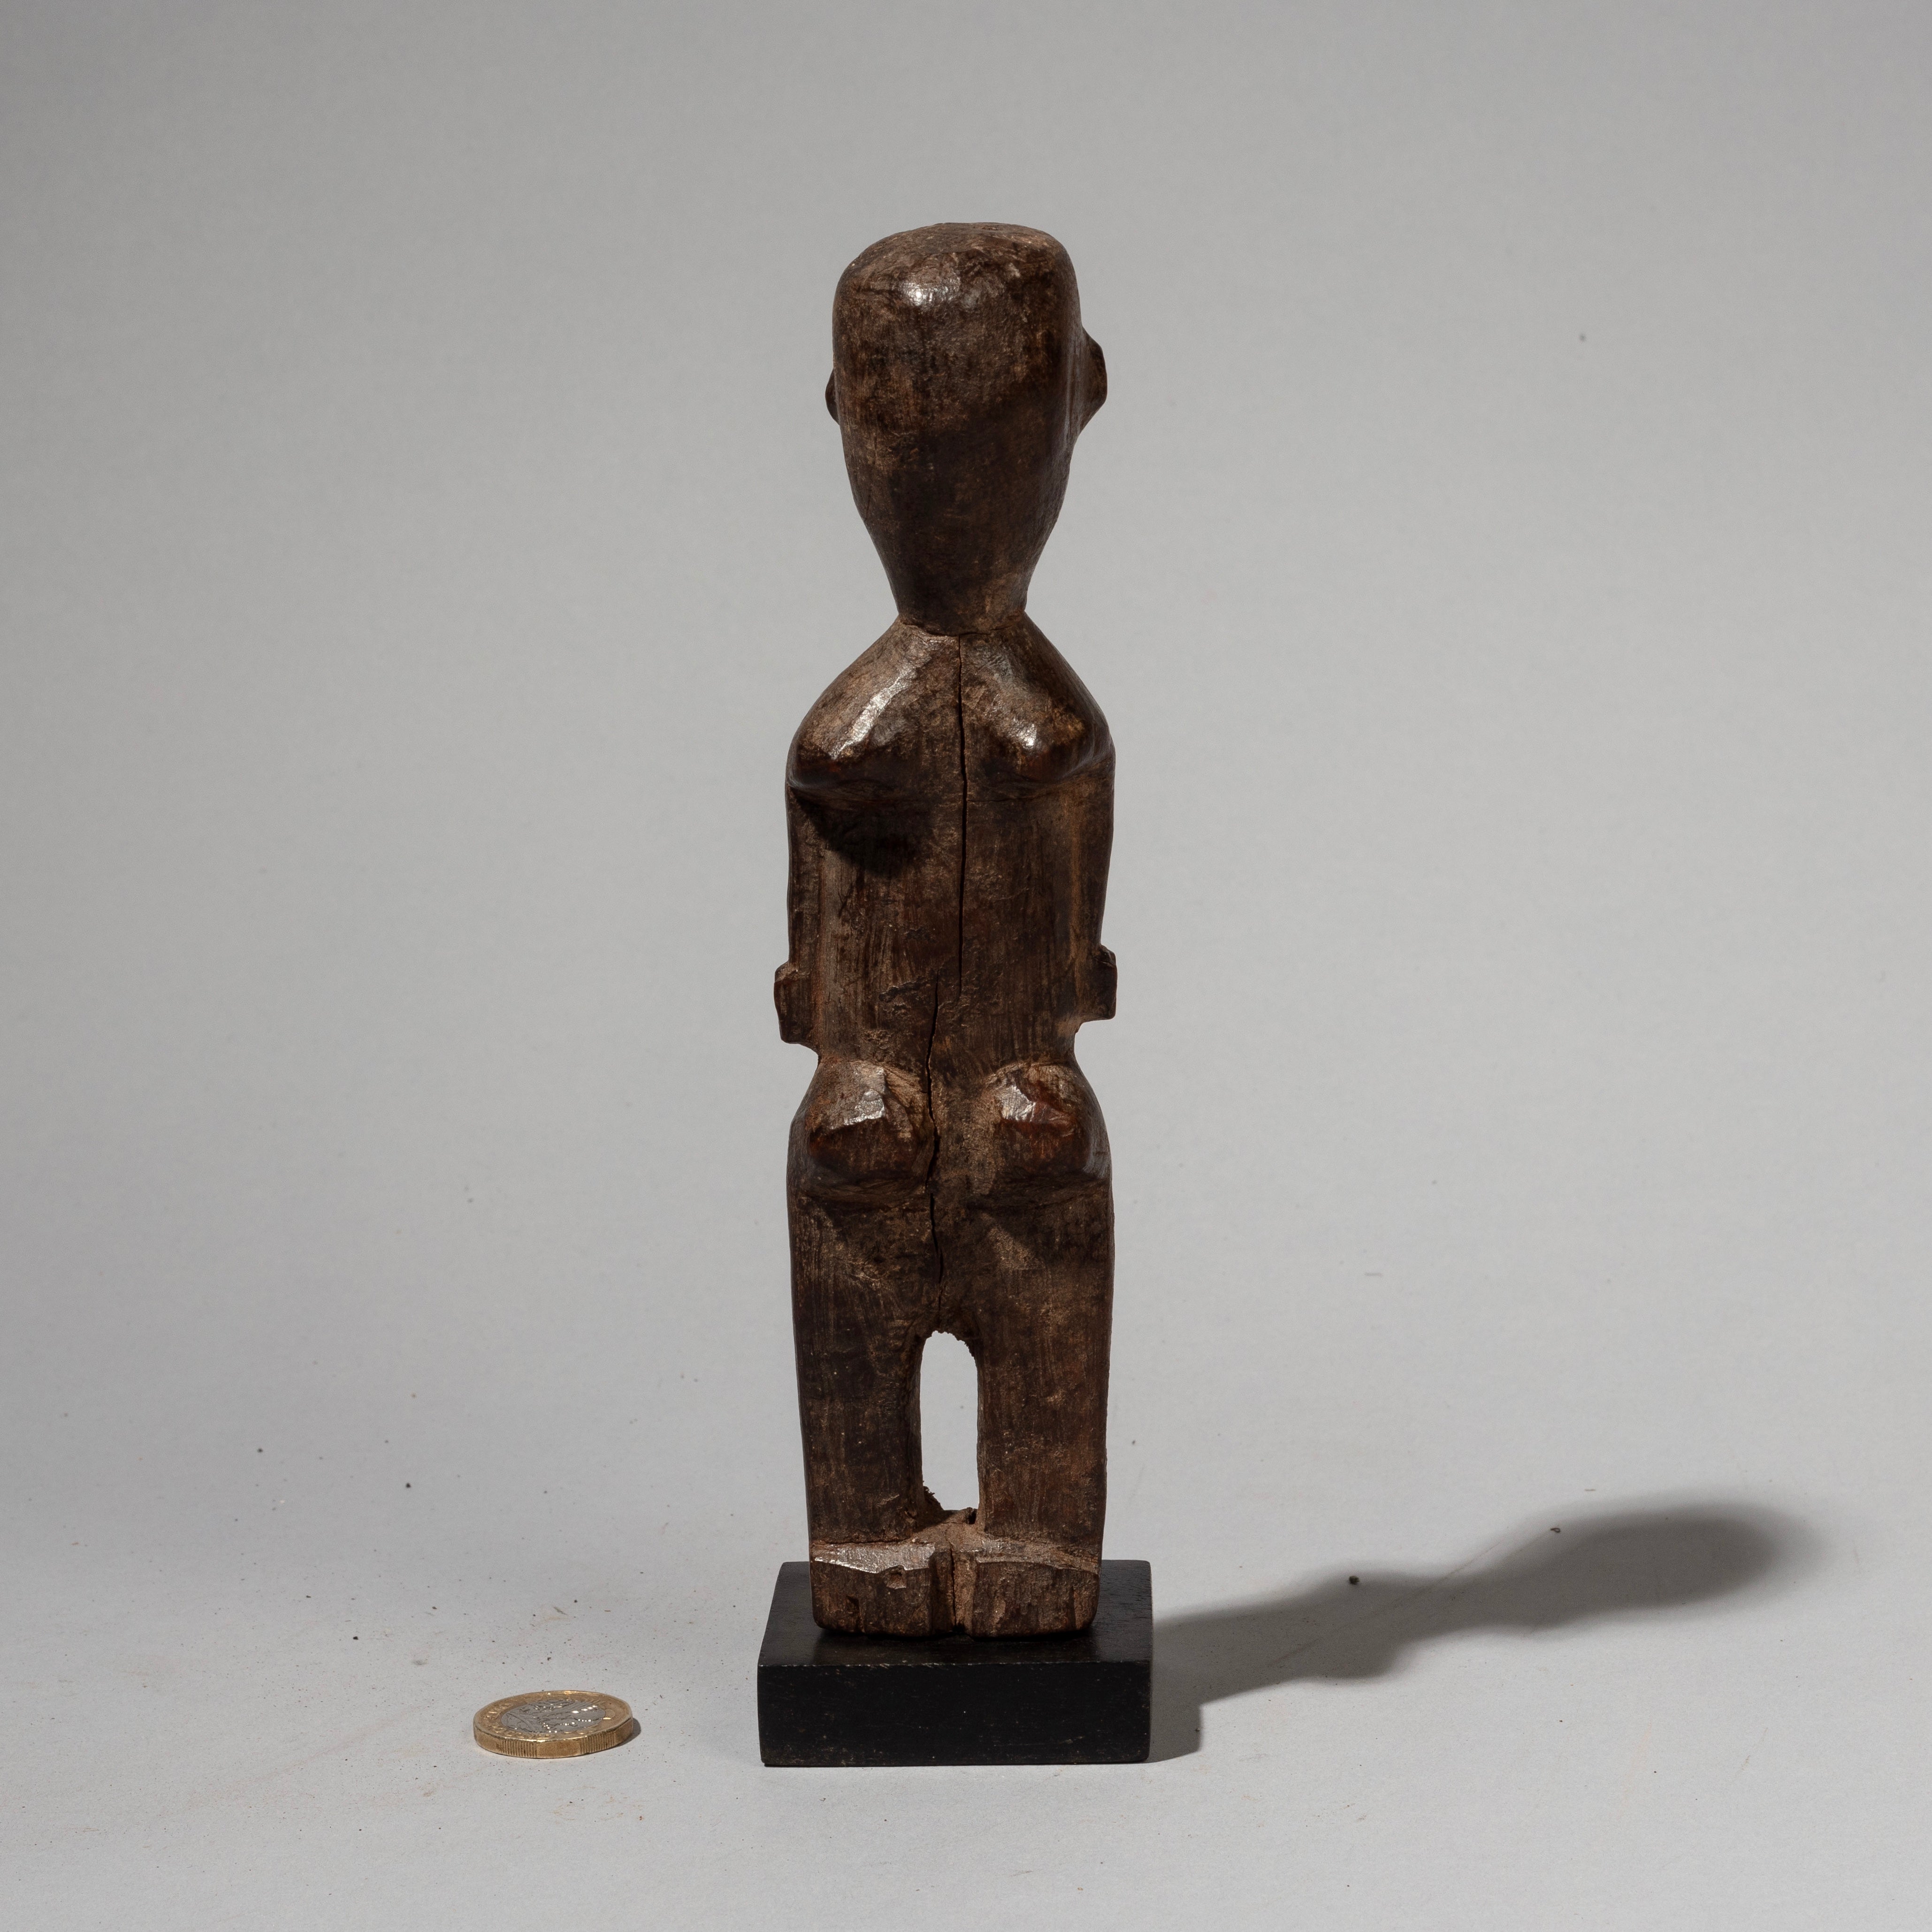 A BIG NOSED CHARM FIGURE FROM THE LOBI TRIBE OF BURKINA FASO W.AFRICA( No 2146)